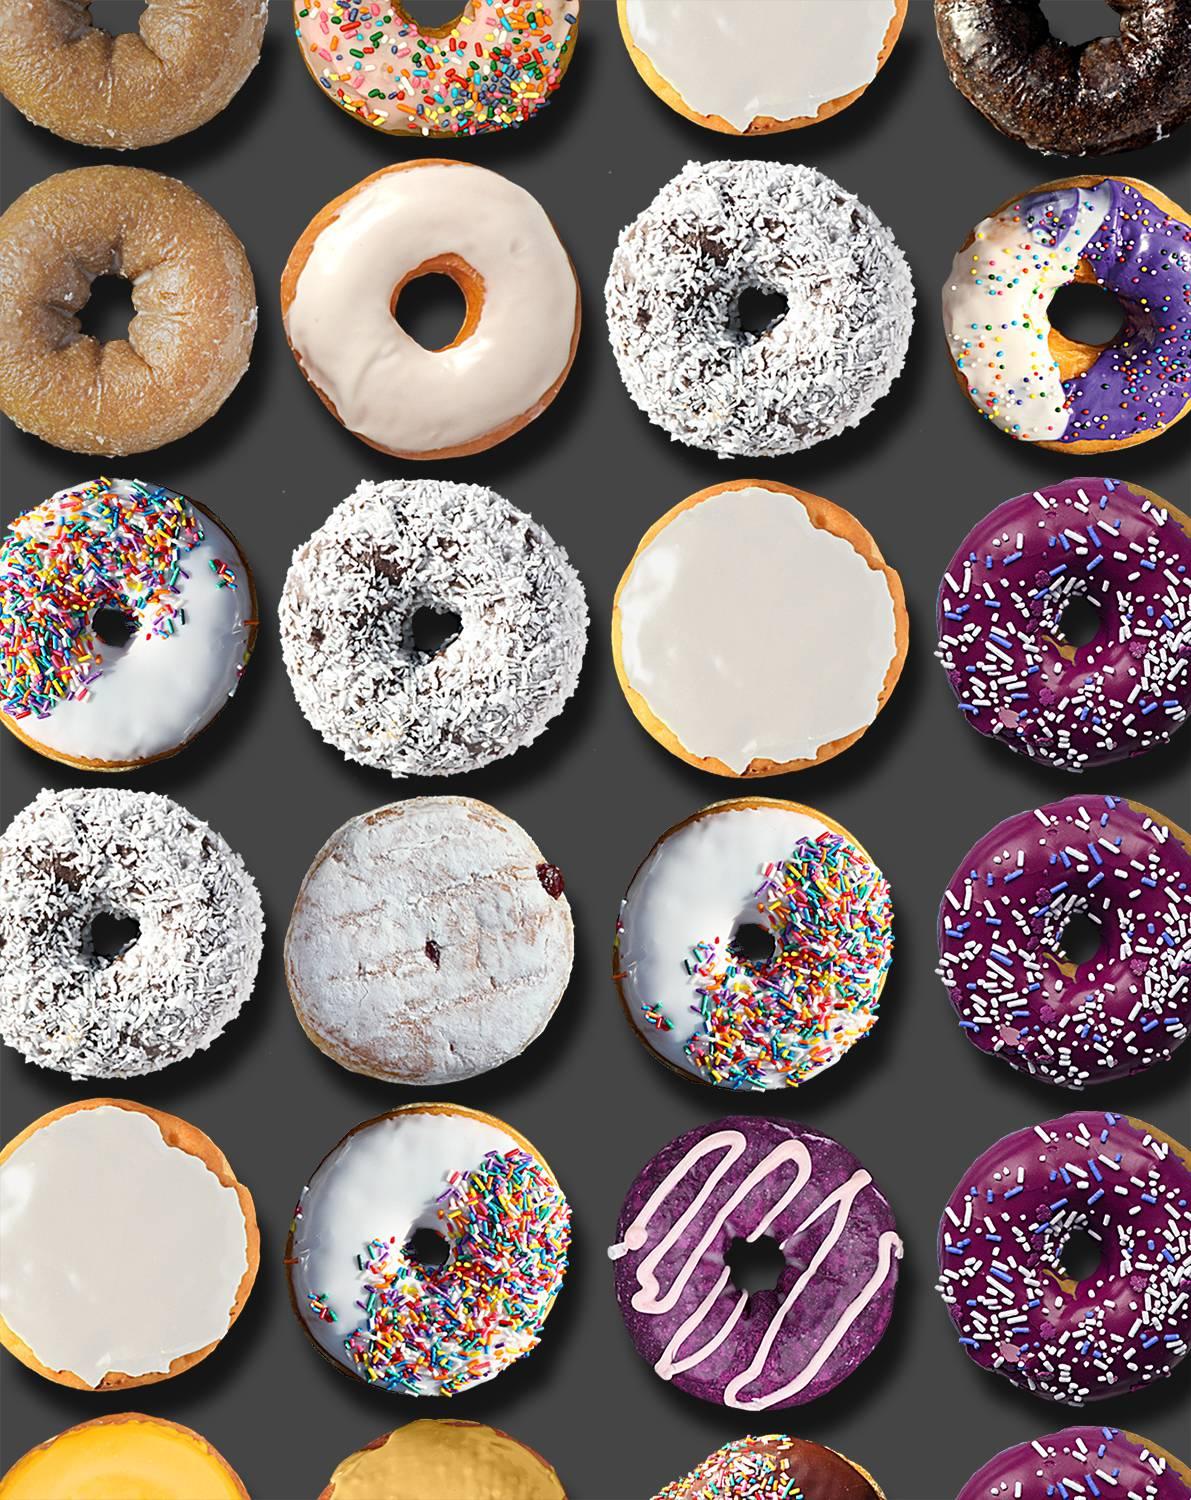 You have read about the extraordinary donut portraits by Candice CMC on social media world-wide and we are excited and proud to represent her work. 

This one of a kind photo arrangement on 100% rag paper by Candice CMC measures 55x44